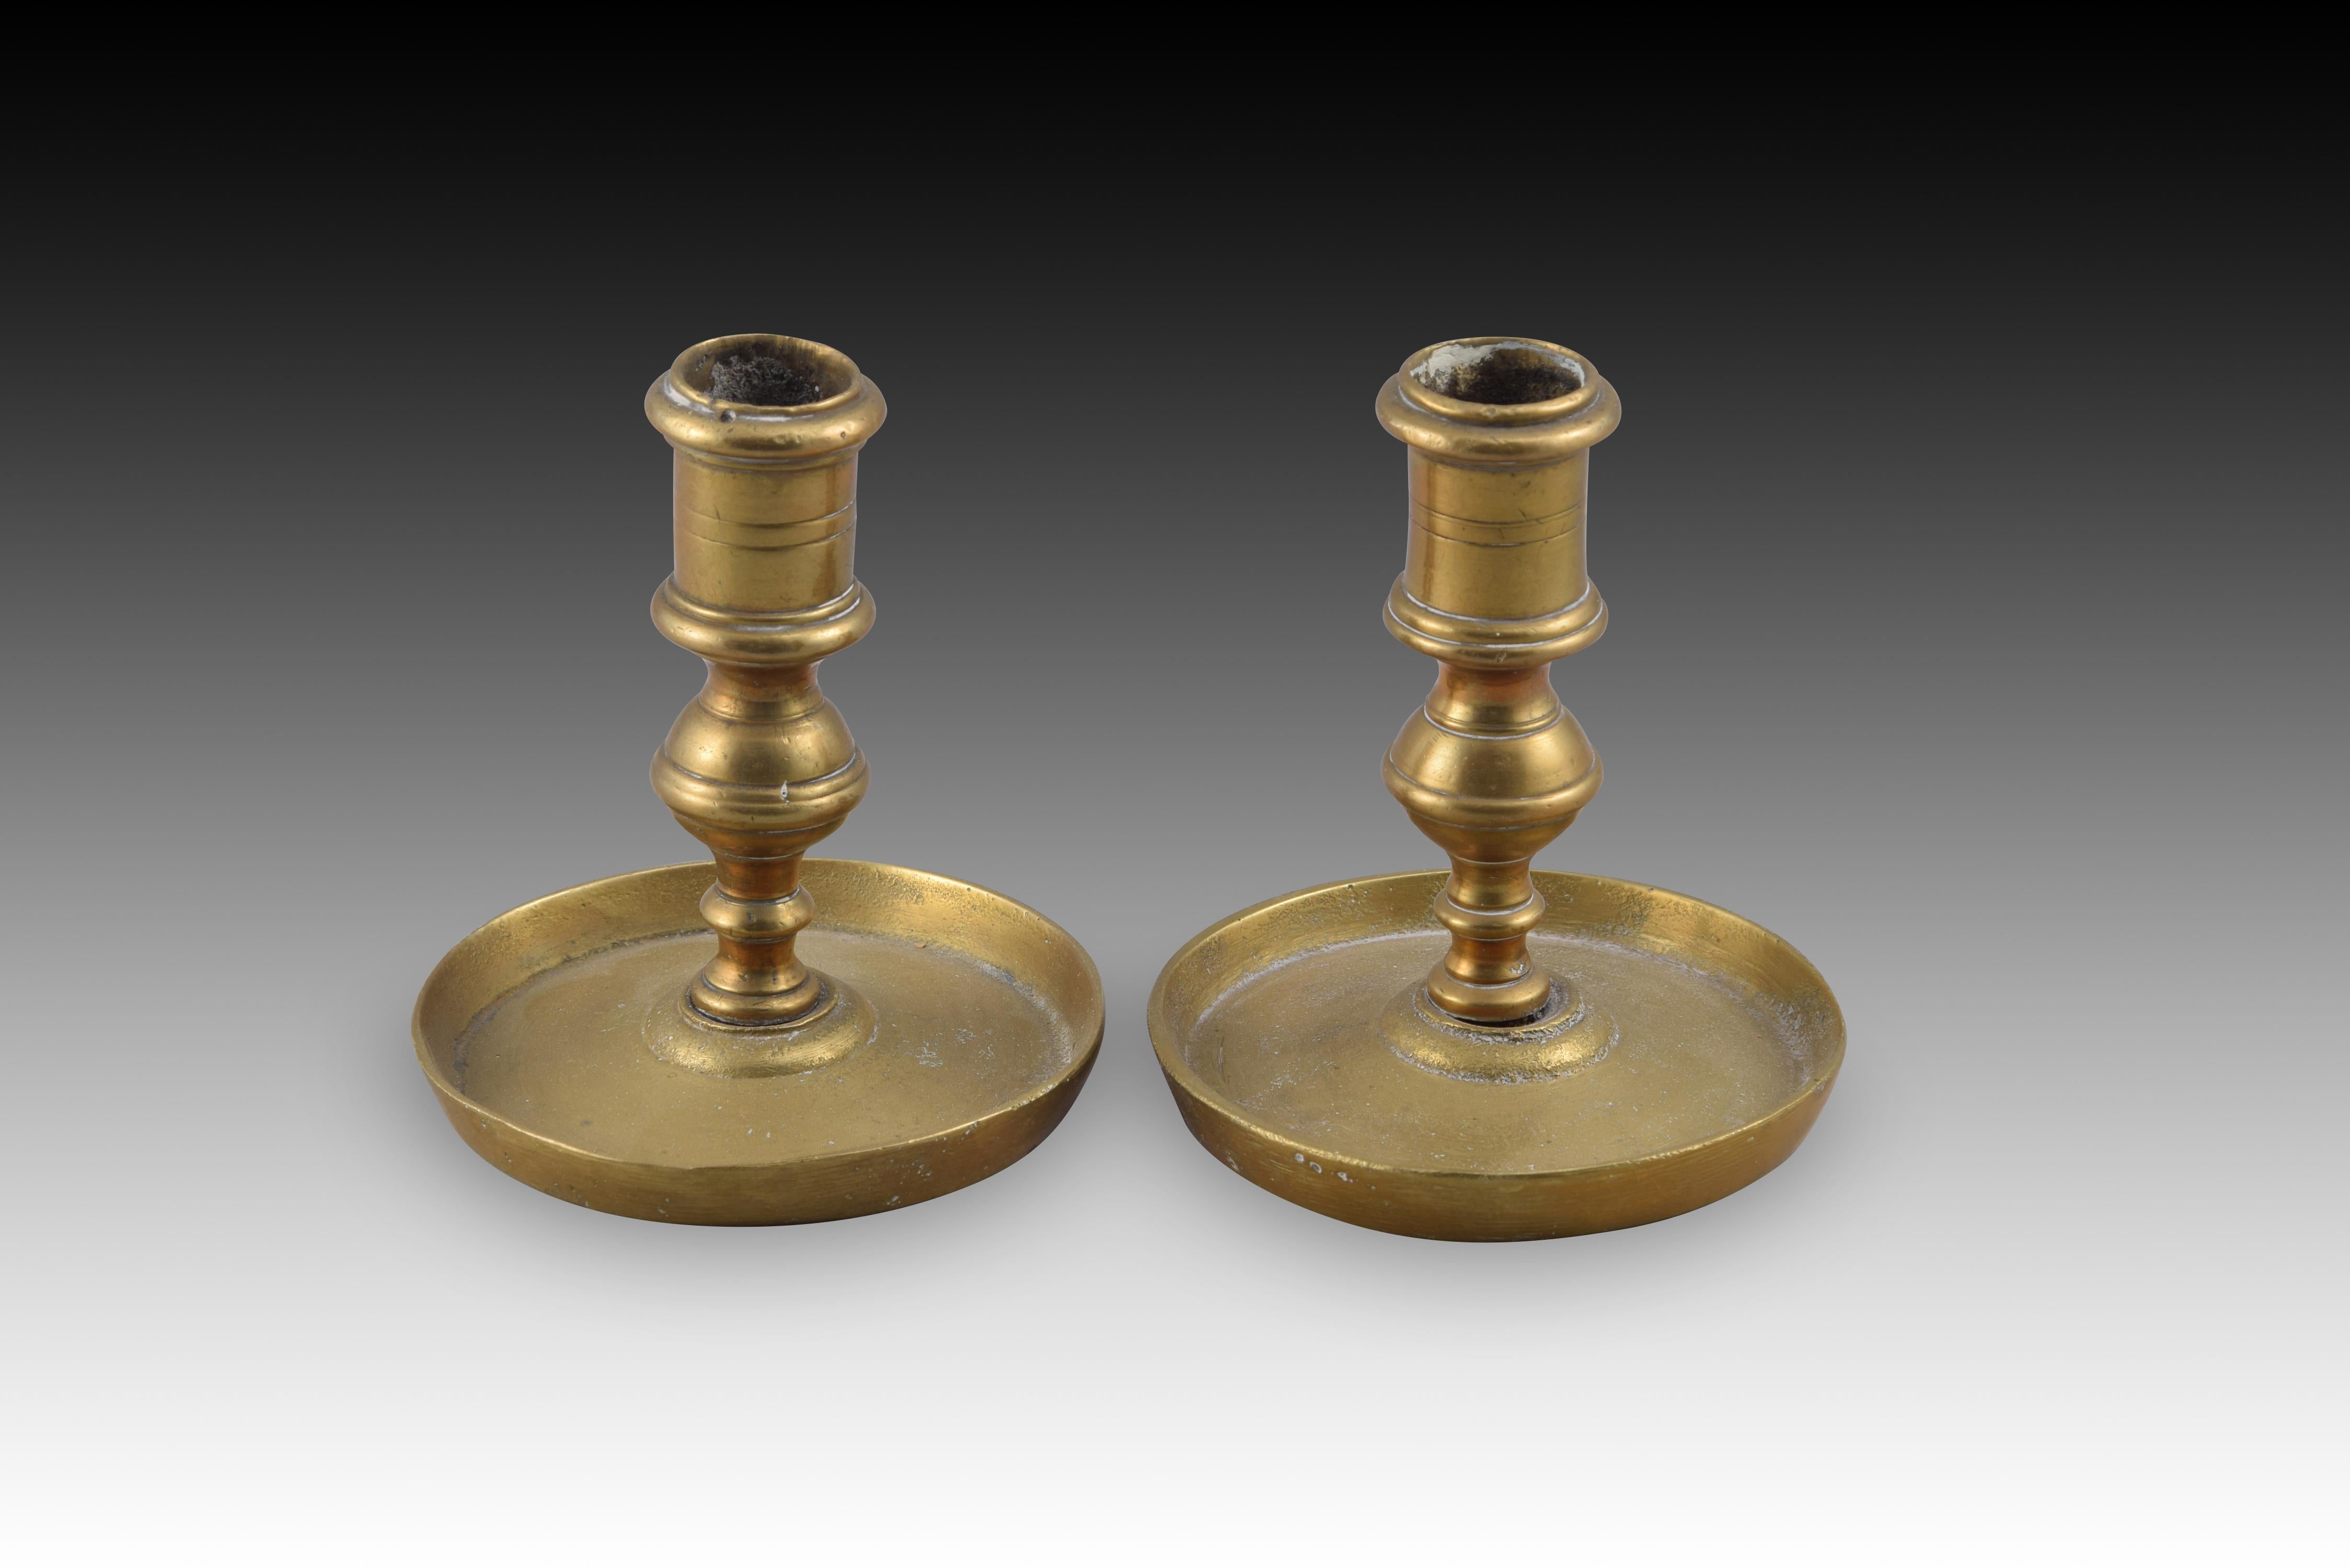 European Pair of Candlesticks or Candle Holders, Bronze, 19th Century For Sale